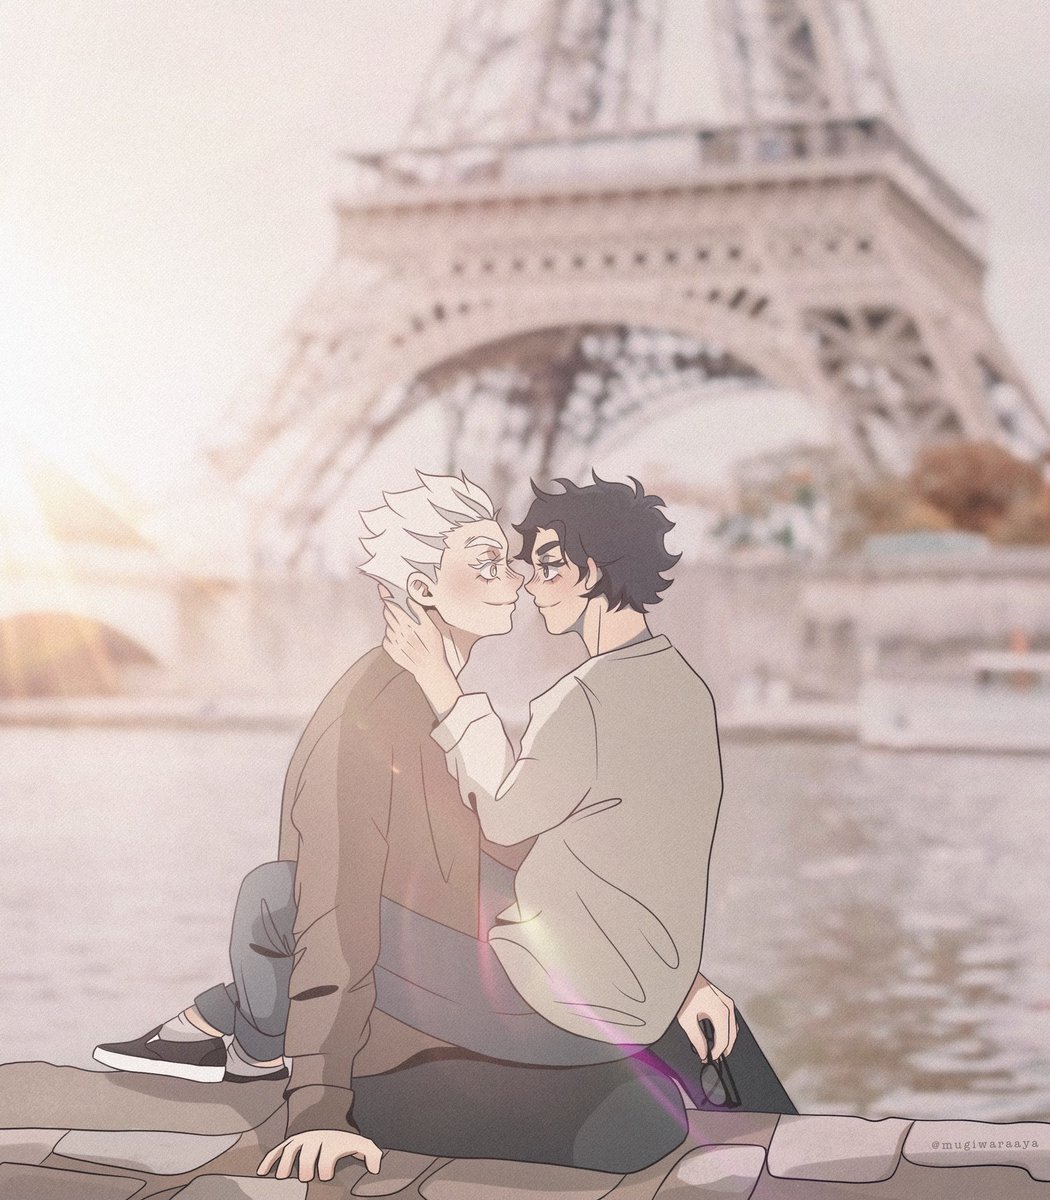 「next stop: paris, the city of love <3
#b」|cat 🪴 @ uni/comms/mailing ordersのイラスト